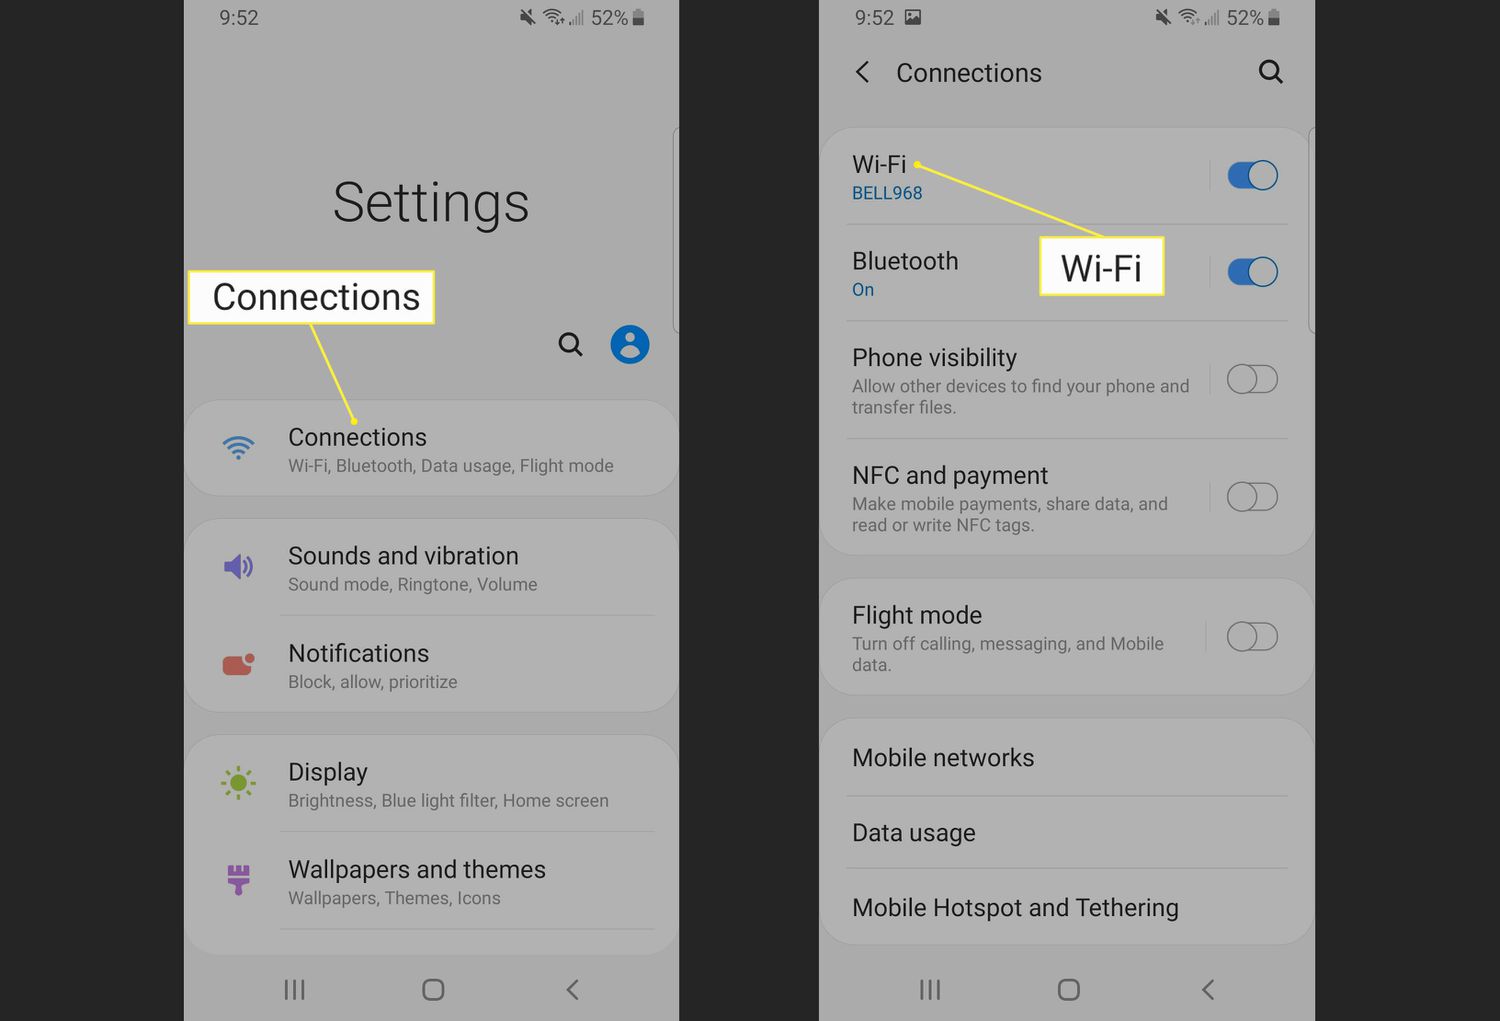 How Can I Transfer Files from Android to Iphone Using Wifi Direct